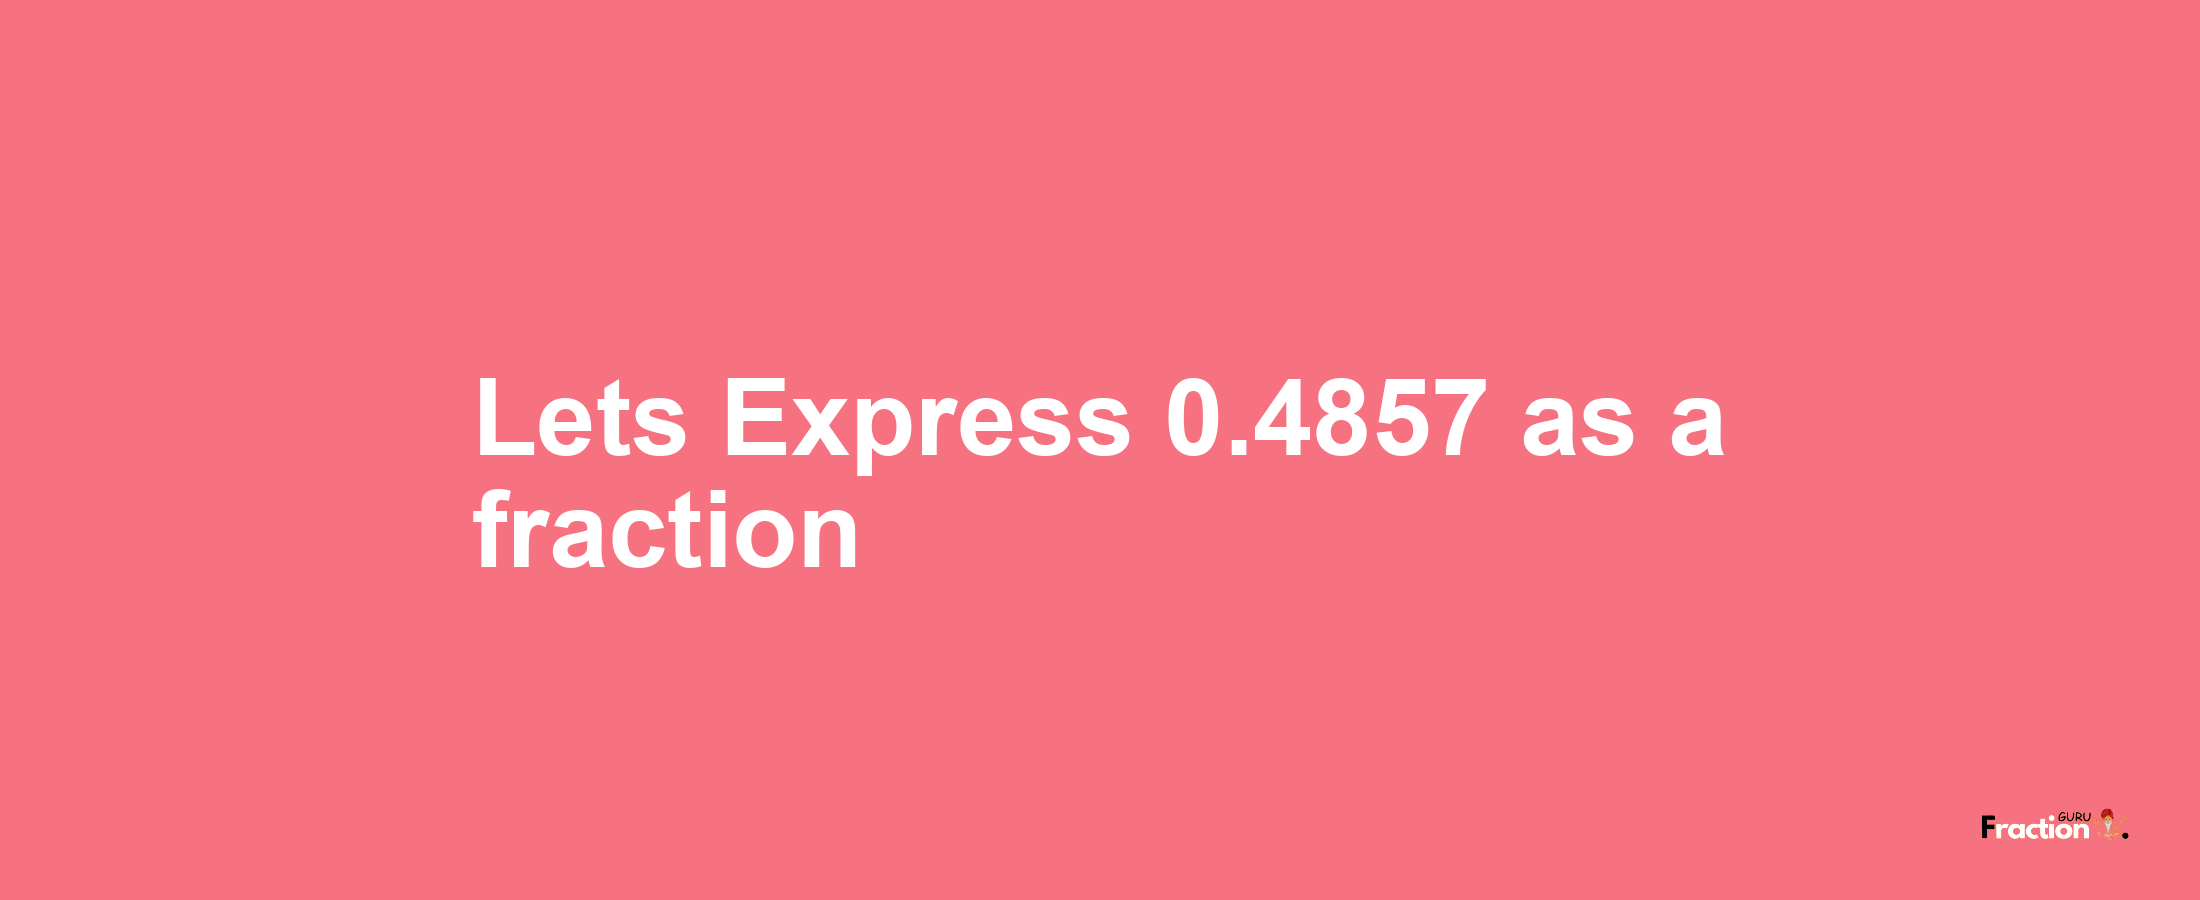 Lets Express 0.4857 as afraction